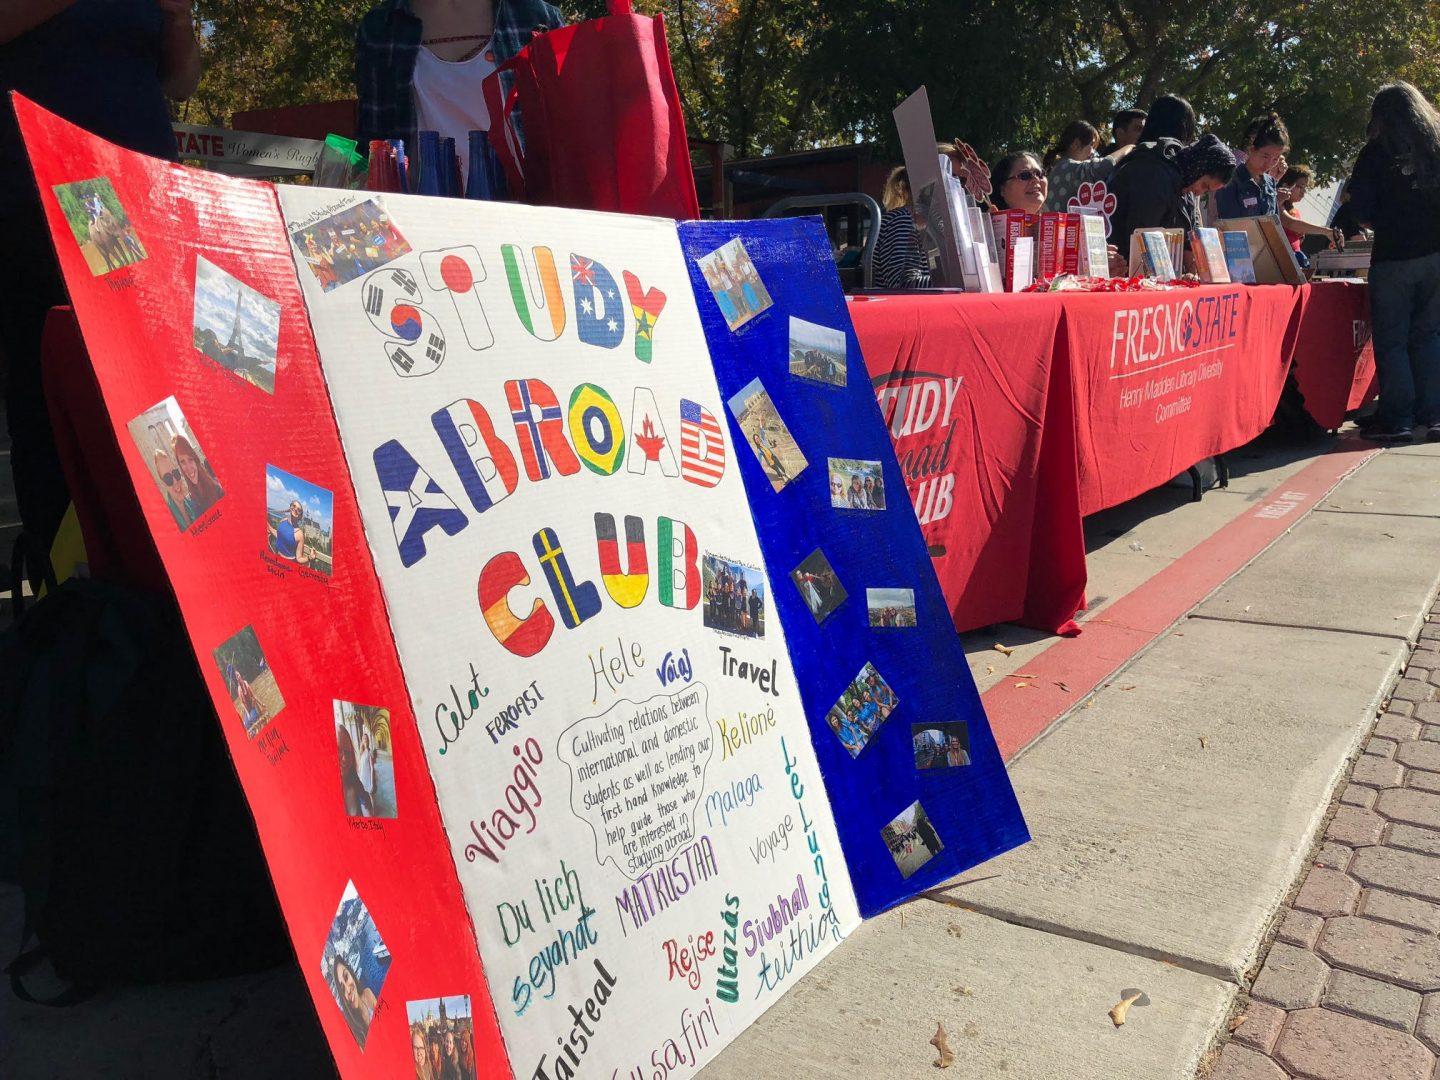 Fresno State student organization, Study Abroad Club, hosts a booth at the kick off for International Education Week on Nov. 13 near the Speaker’s Platform. (Jessica Johnson/The Collegian)